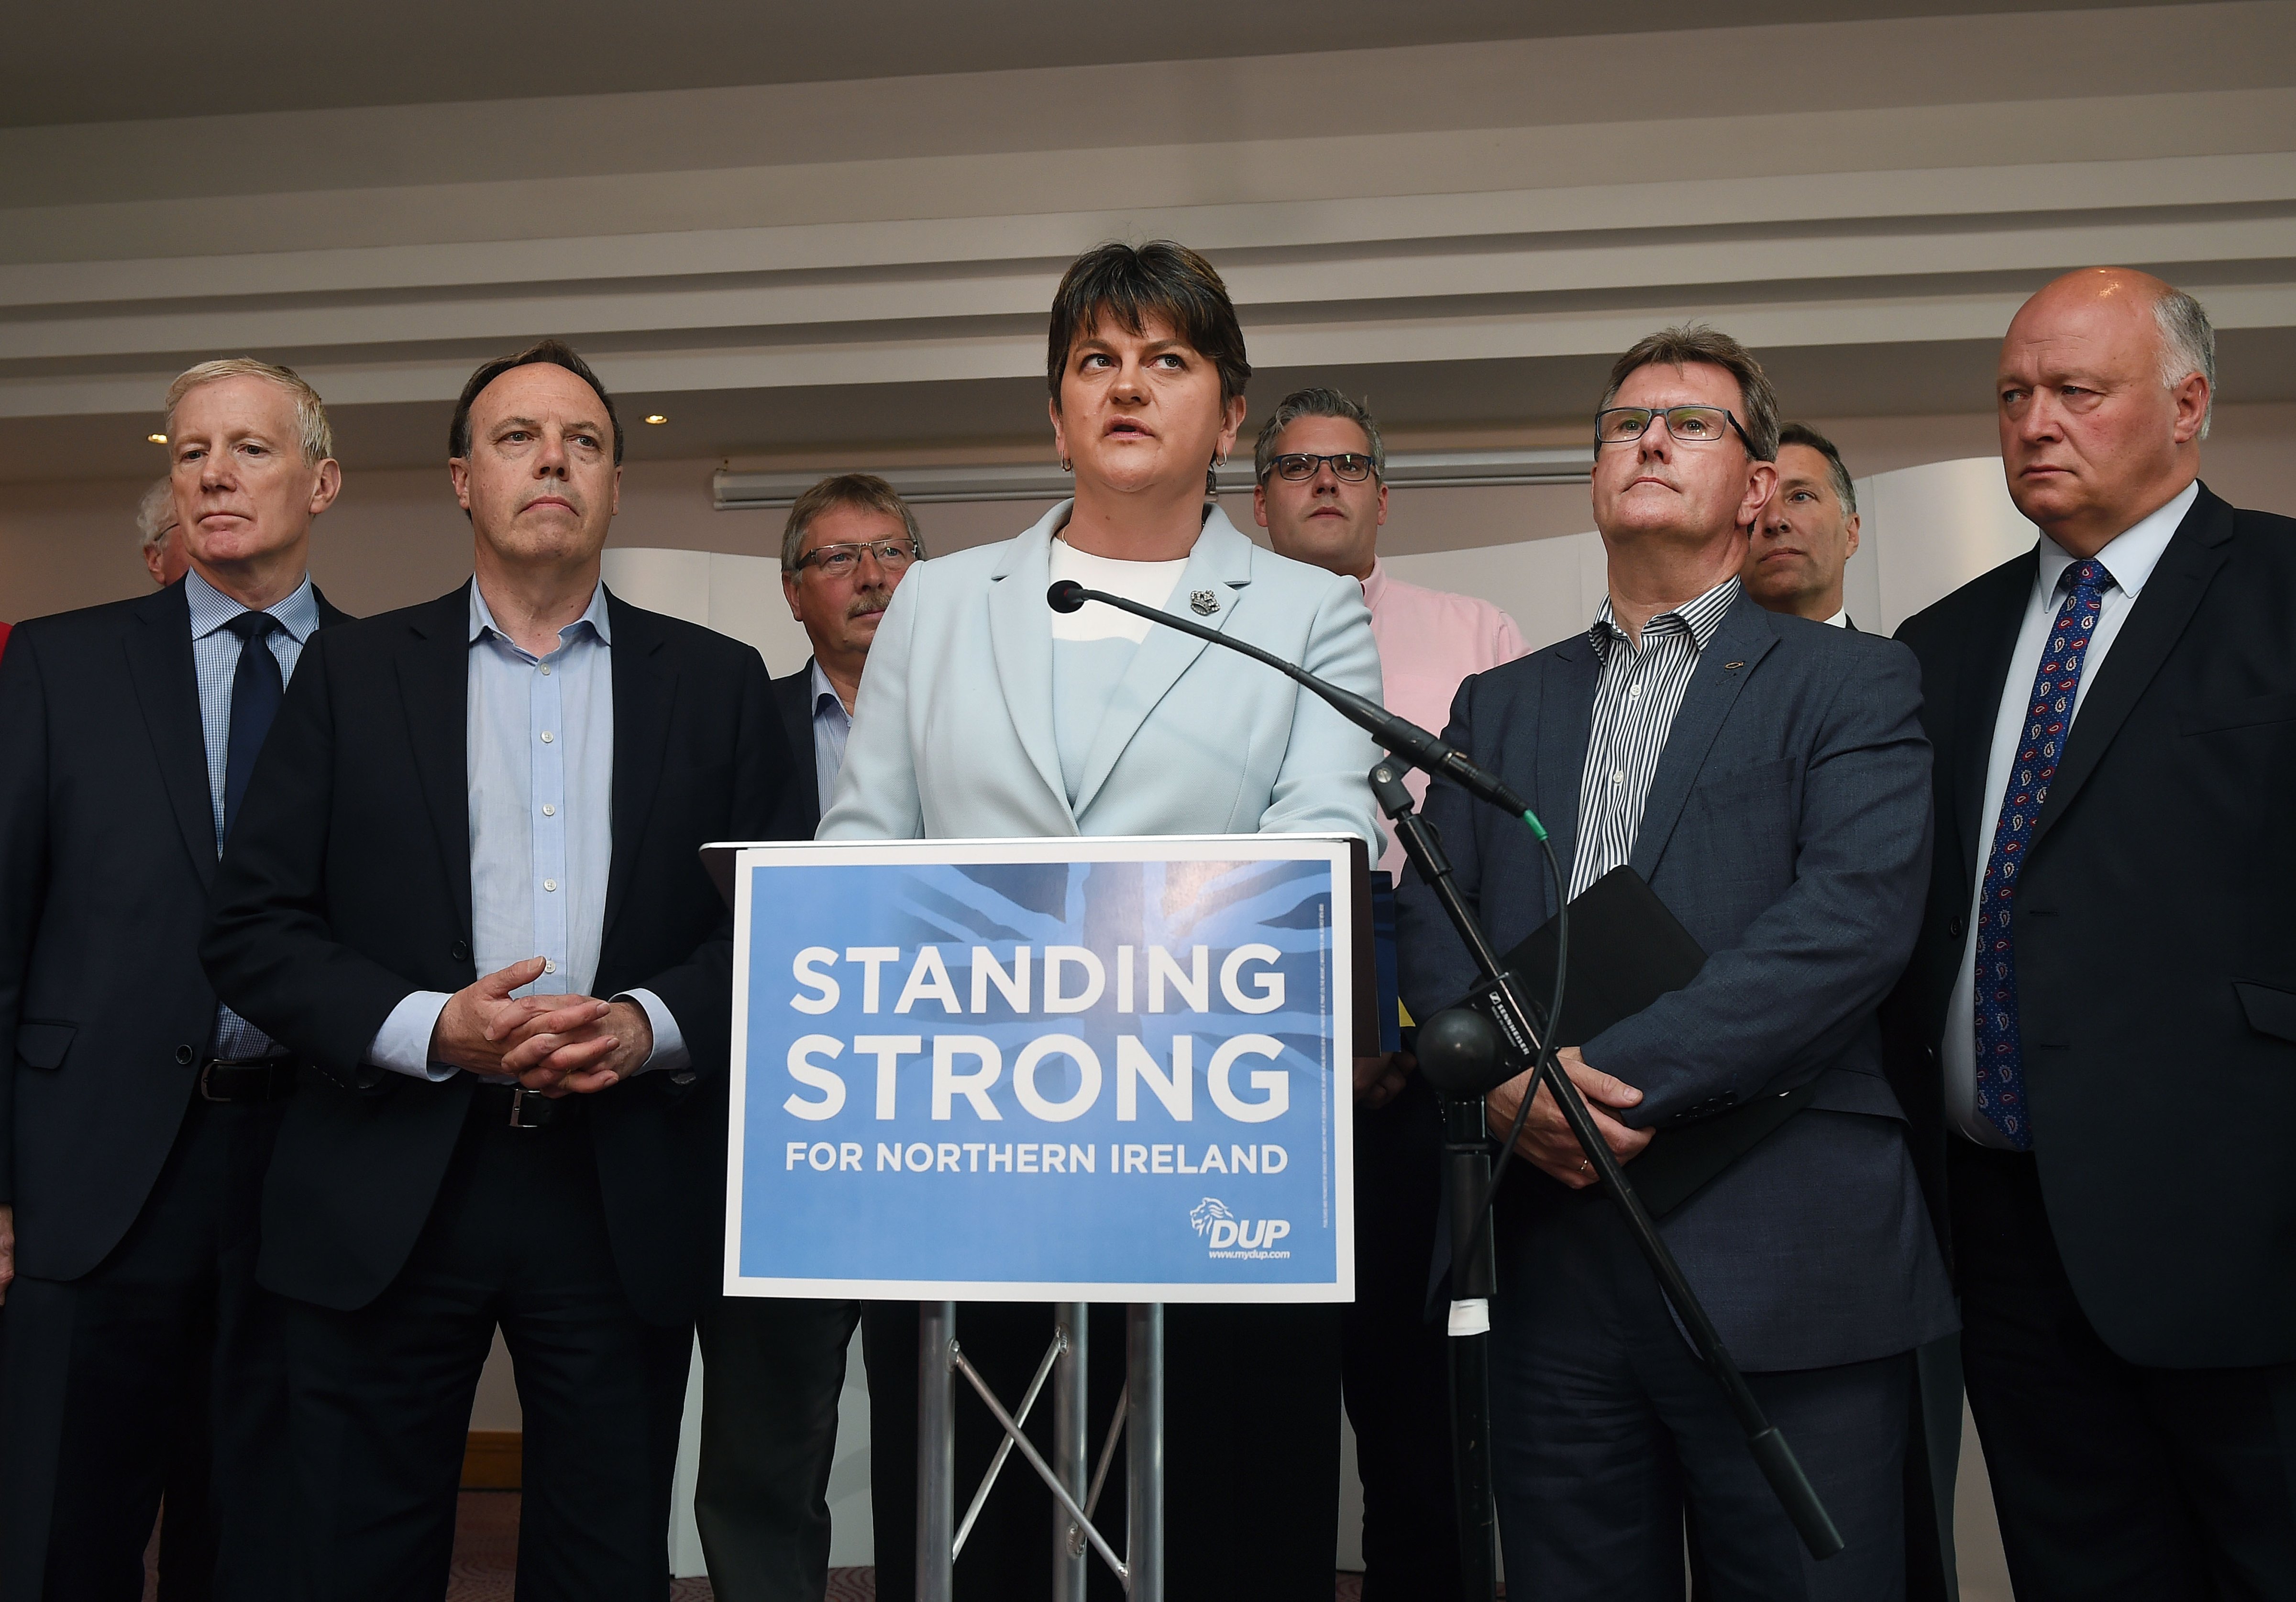 DUP leader and Northern Ireland former First Minister Arlene Foster (C) holds a brief press conference with the DUP's newly elected Westminster candidates who stood in the general election on June 9, 2017 in Belfast, Northern Ireland. (Charles McQuillan—Getty Images)